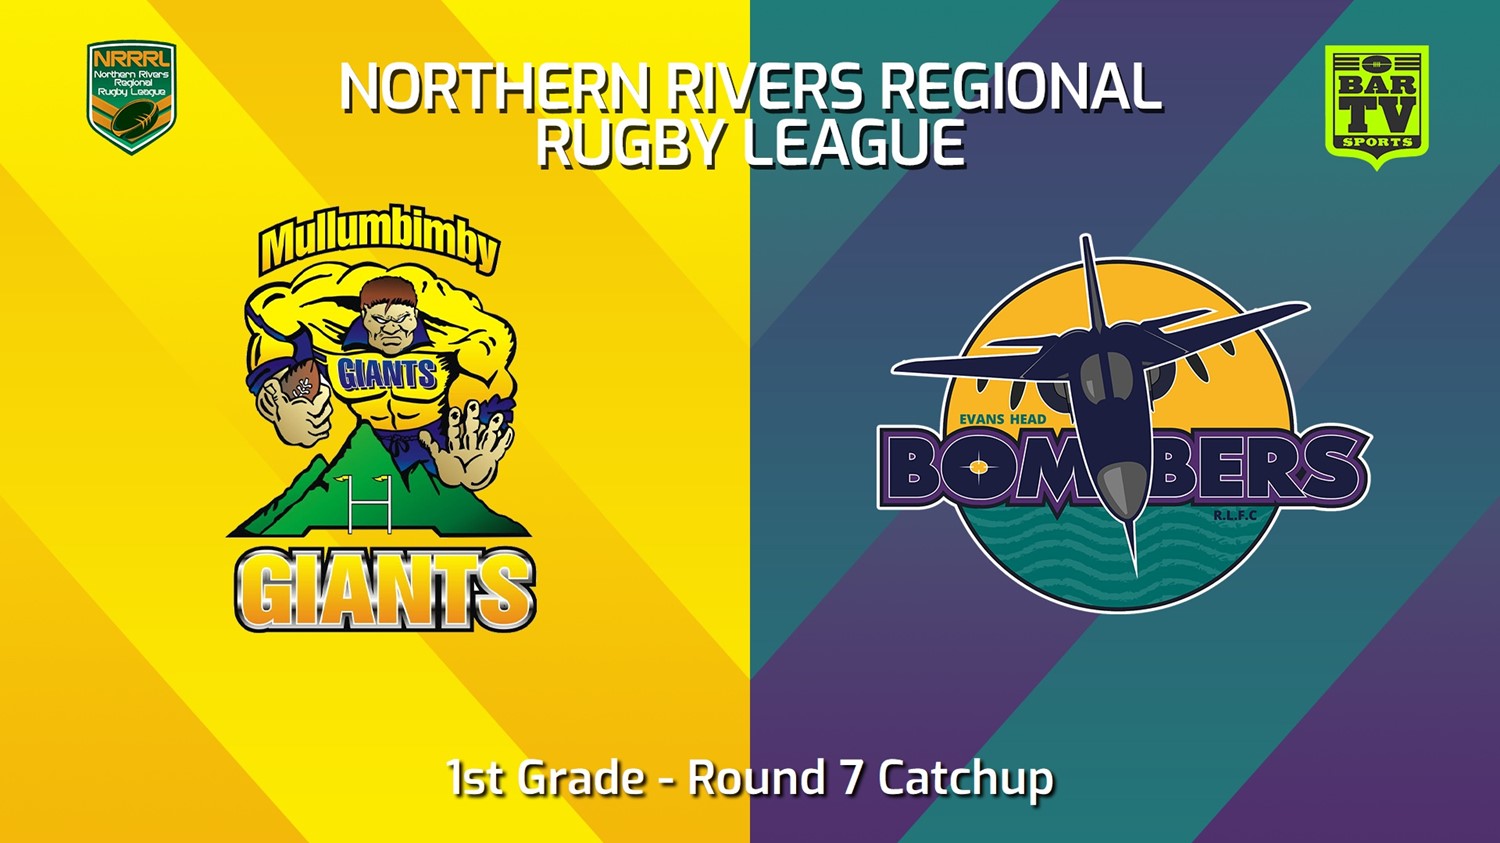 240606-video-Northern Rivers Round 7 Catchup - 1st Grade - Mullumbimby Giants v Evans Head Bombers Slate Image